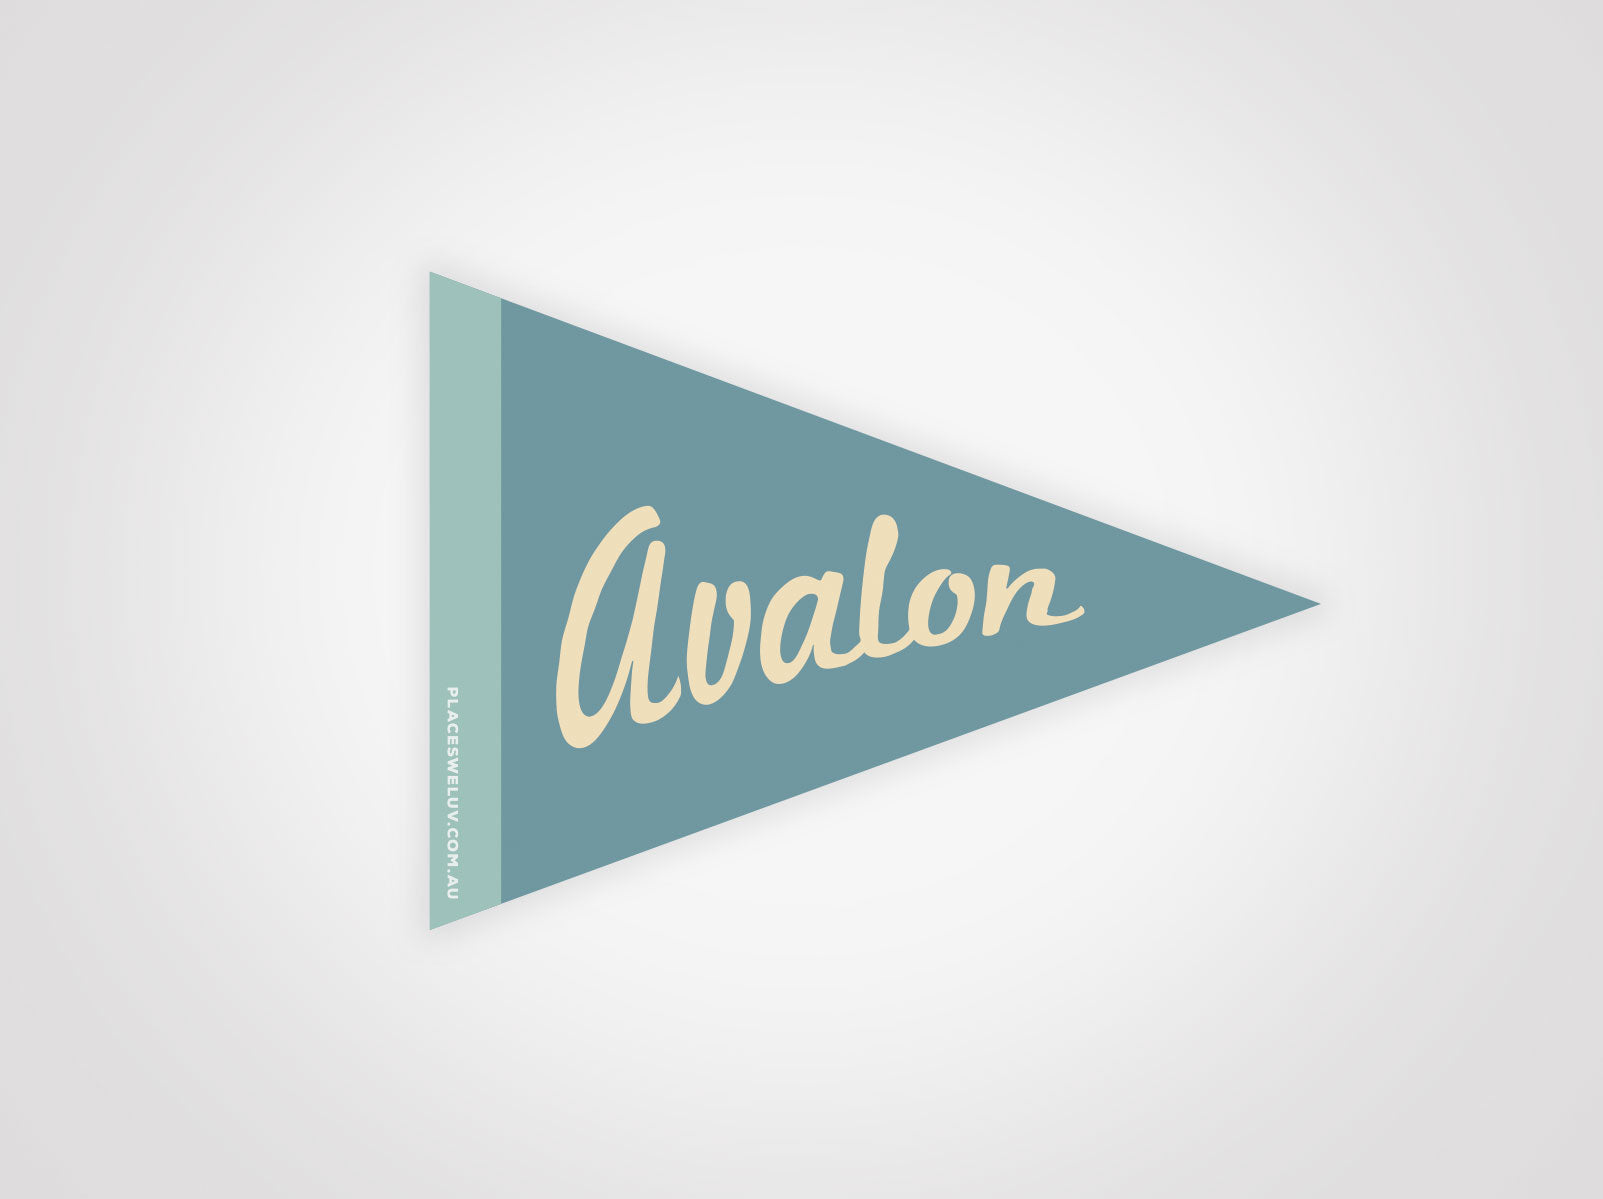 Avalon Vintage travel style Flag decal retro design by place we luv